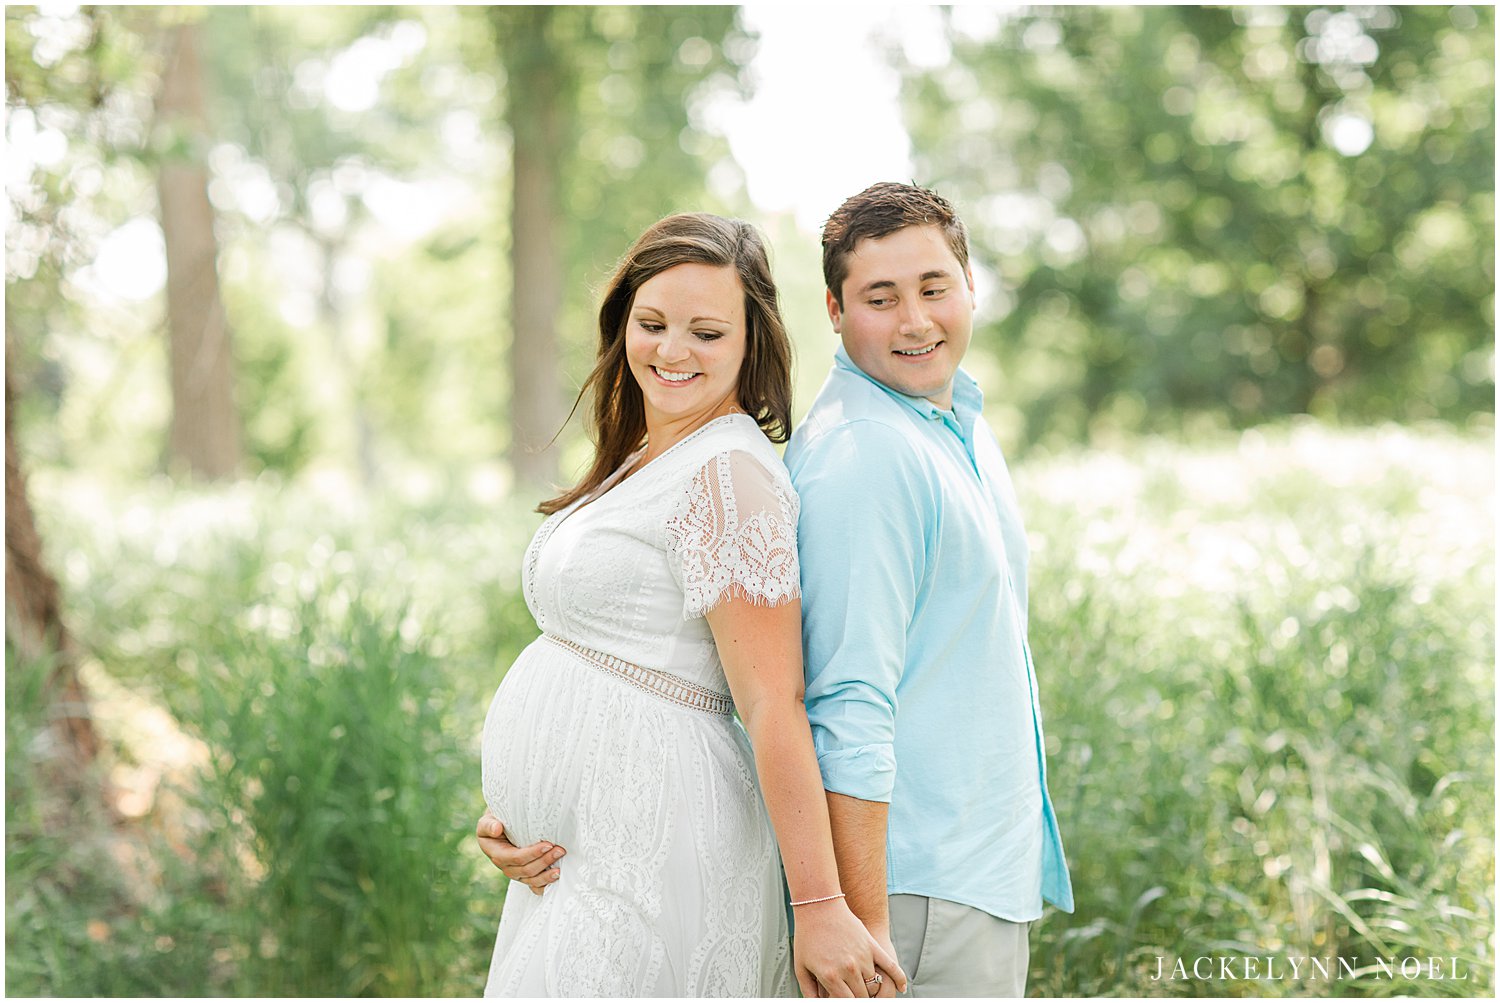 Couples Maternity pose idea for maternity photography session taken at St. Louis Forest Park by Jackelynn Noel Photography | St. Louis Photographer